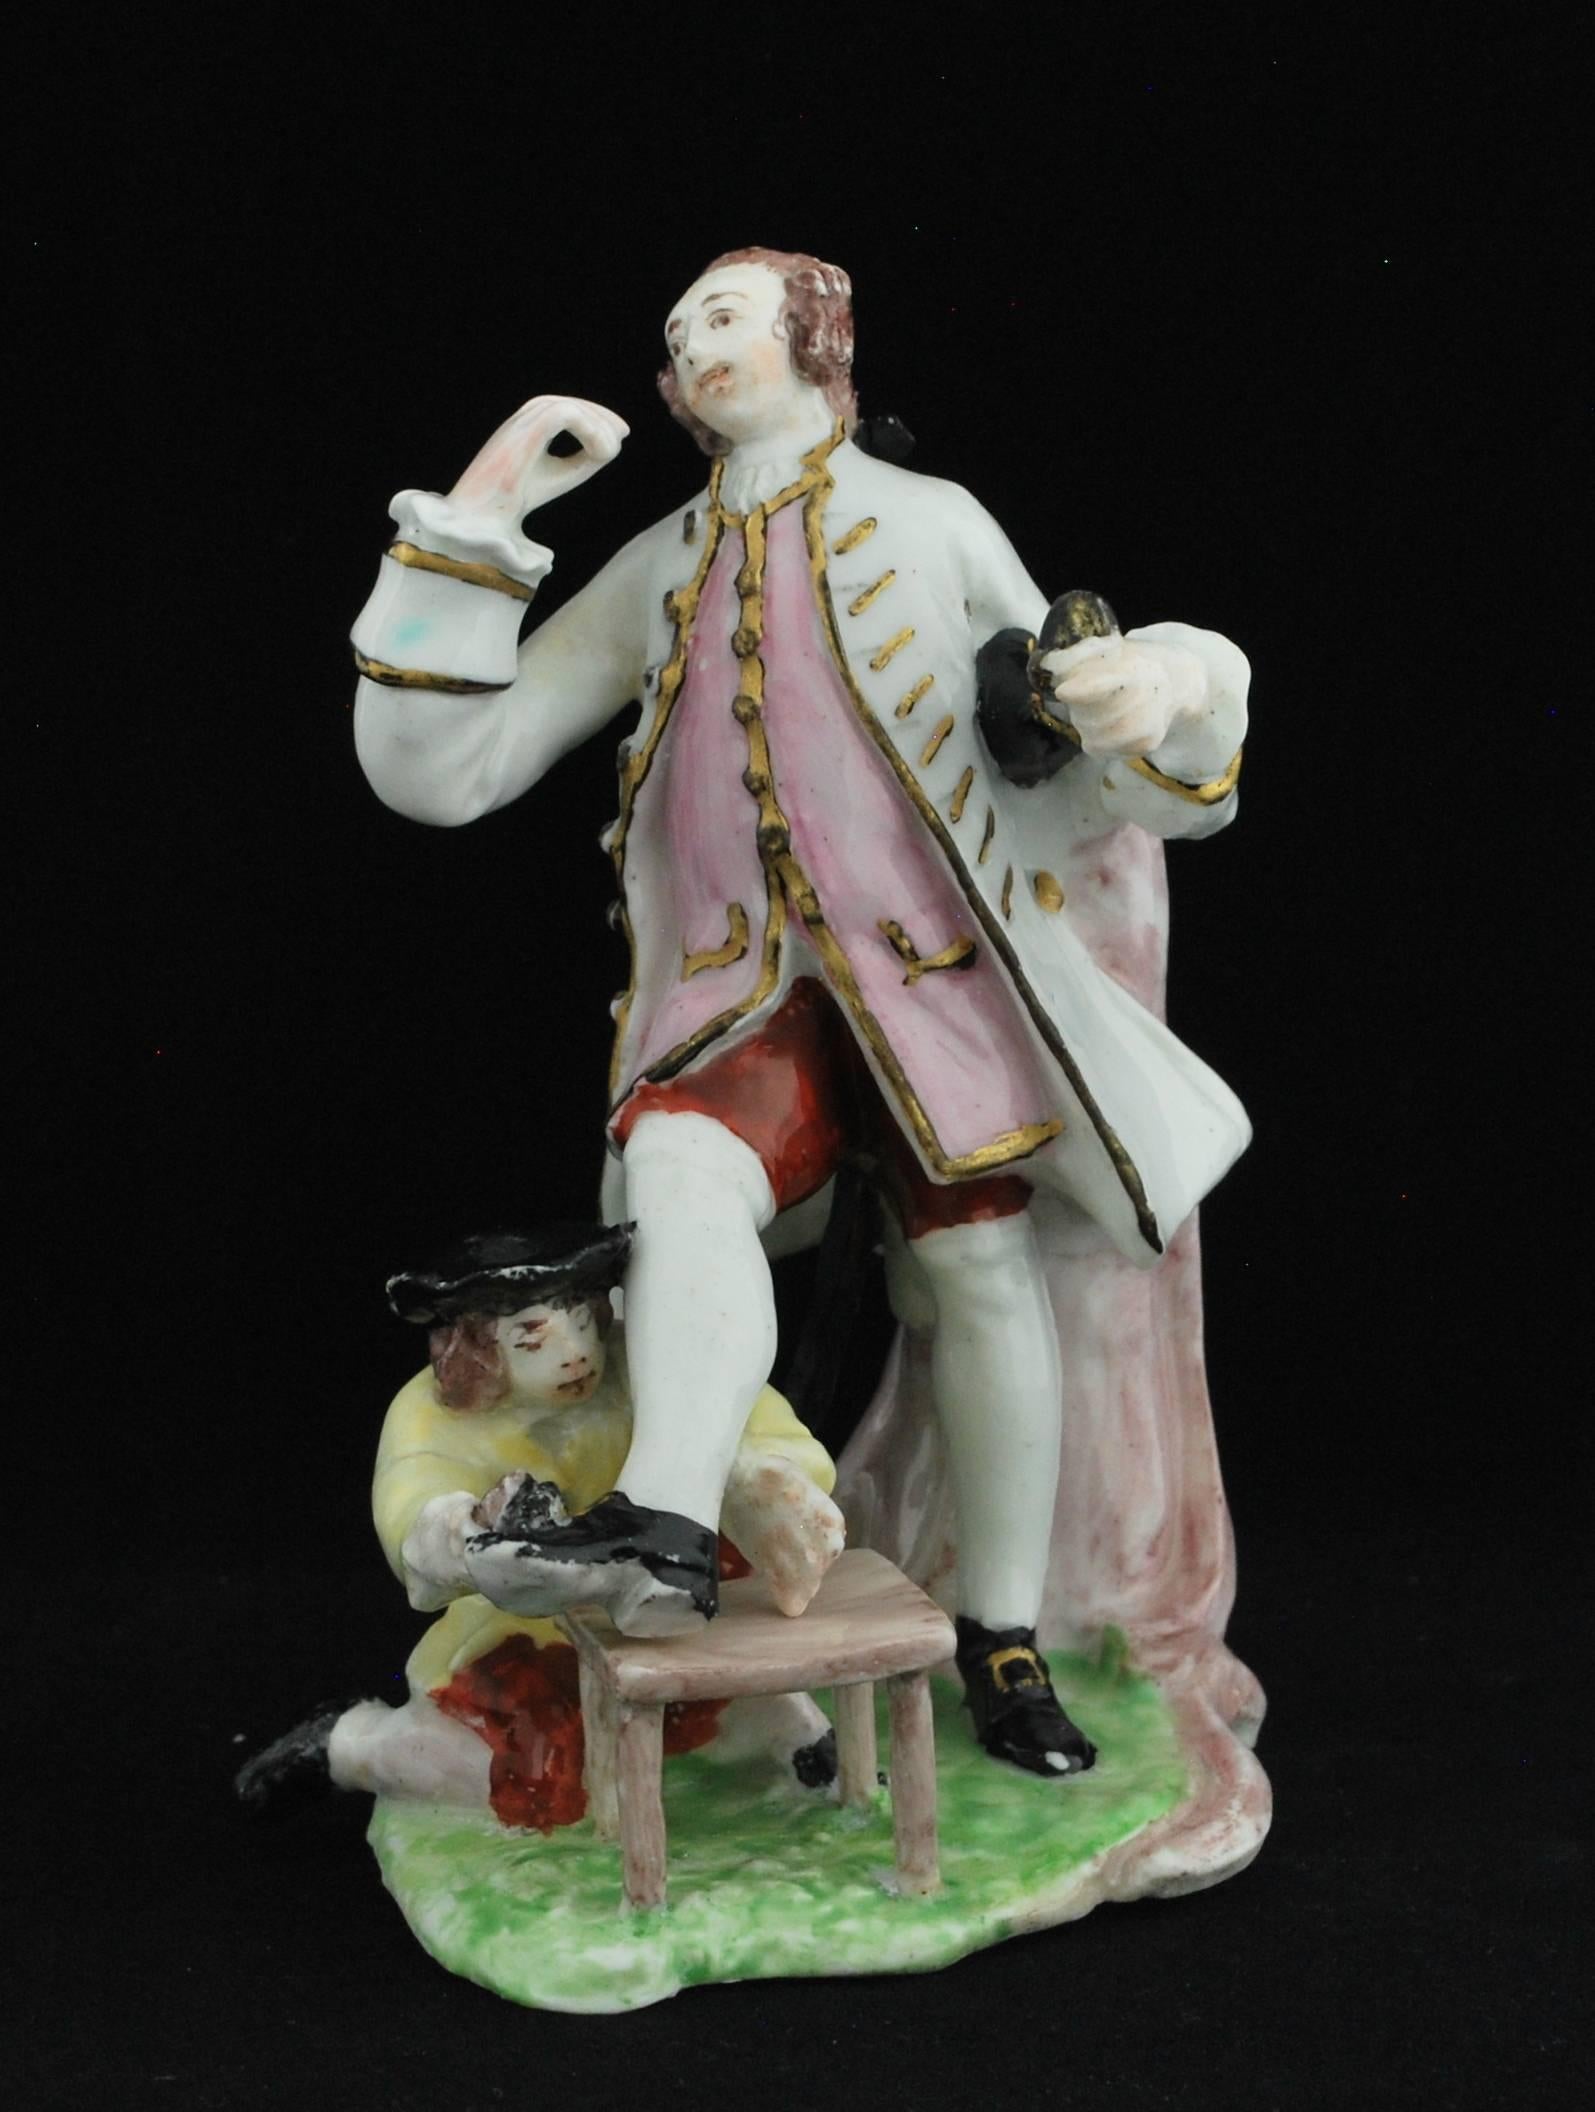 A fashionably dressed gentleman, almost certainly the actor David Garrick: he wears a white frockcoat, pink waistcoat and red breeches, all with embroided gilt enrichments and white stockings, one of which is incised with underglaze decoration. He